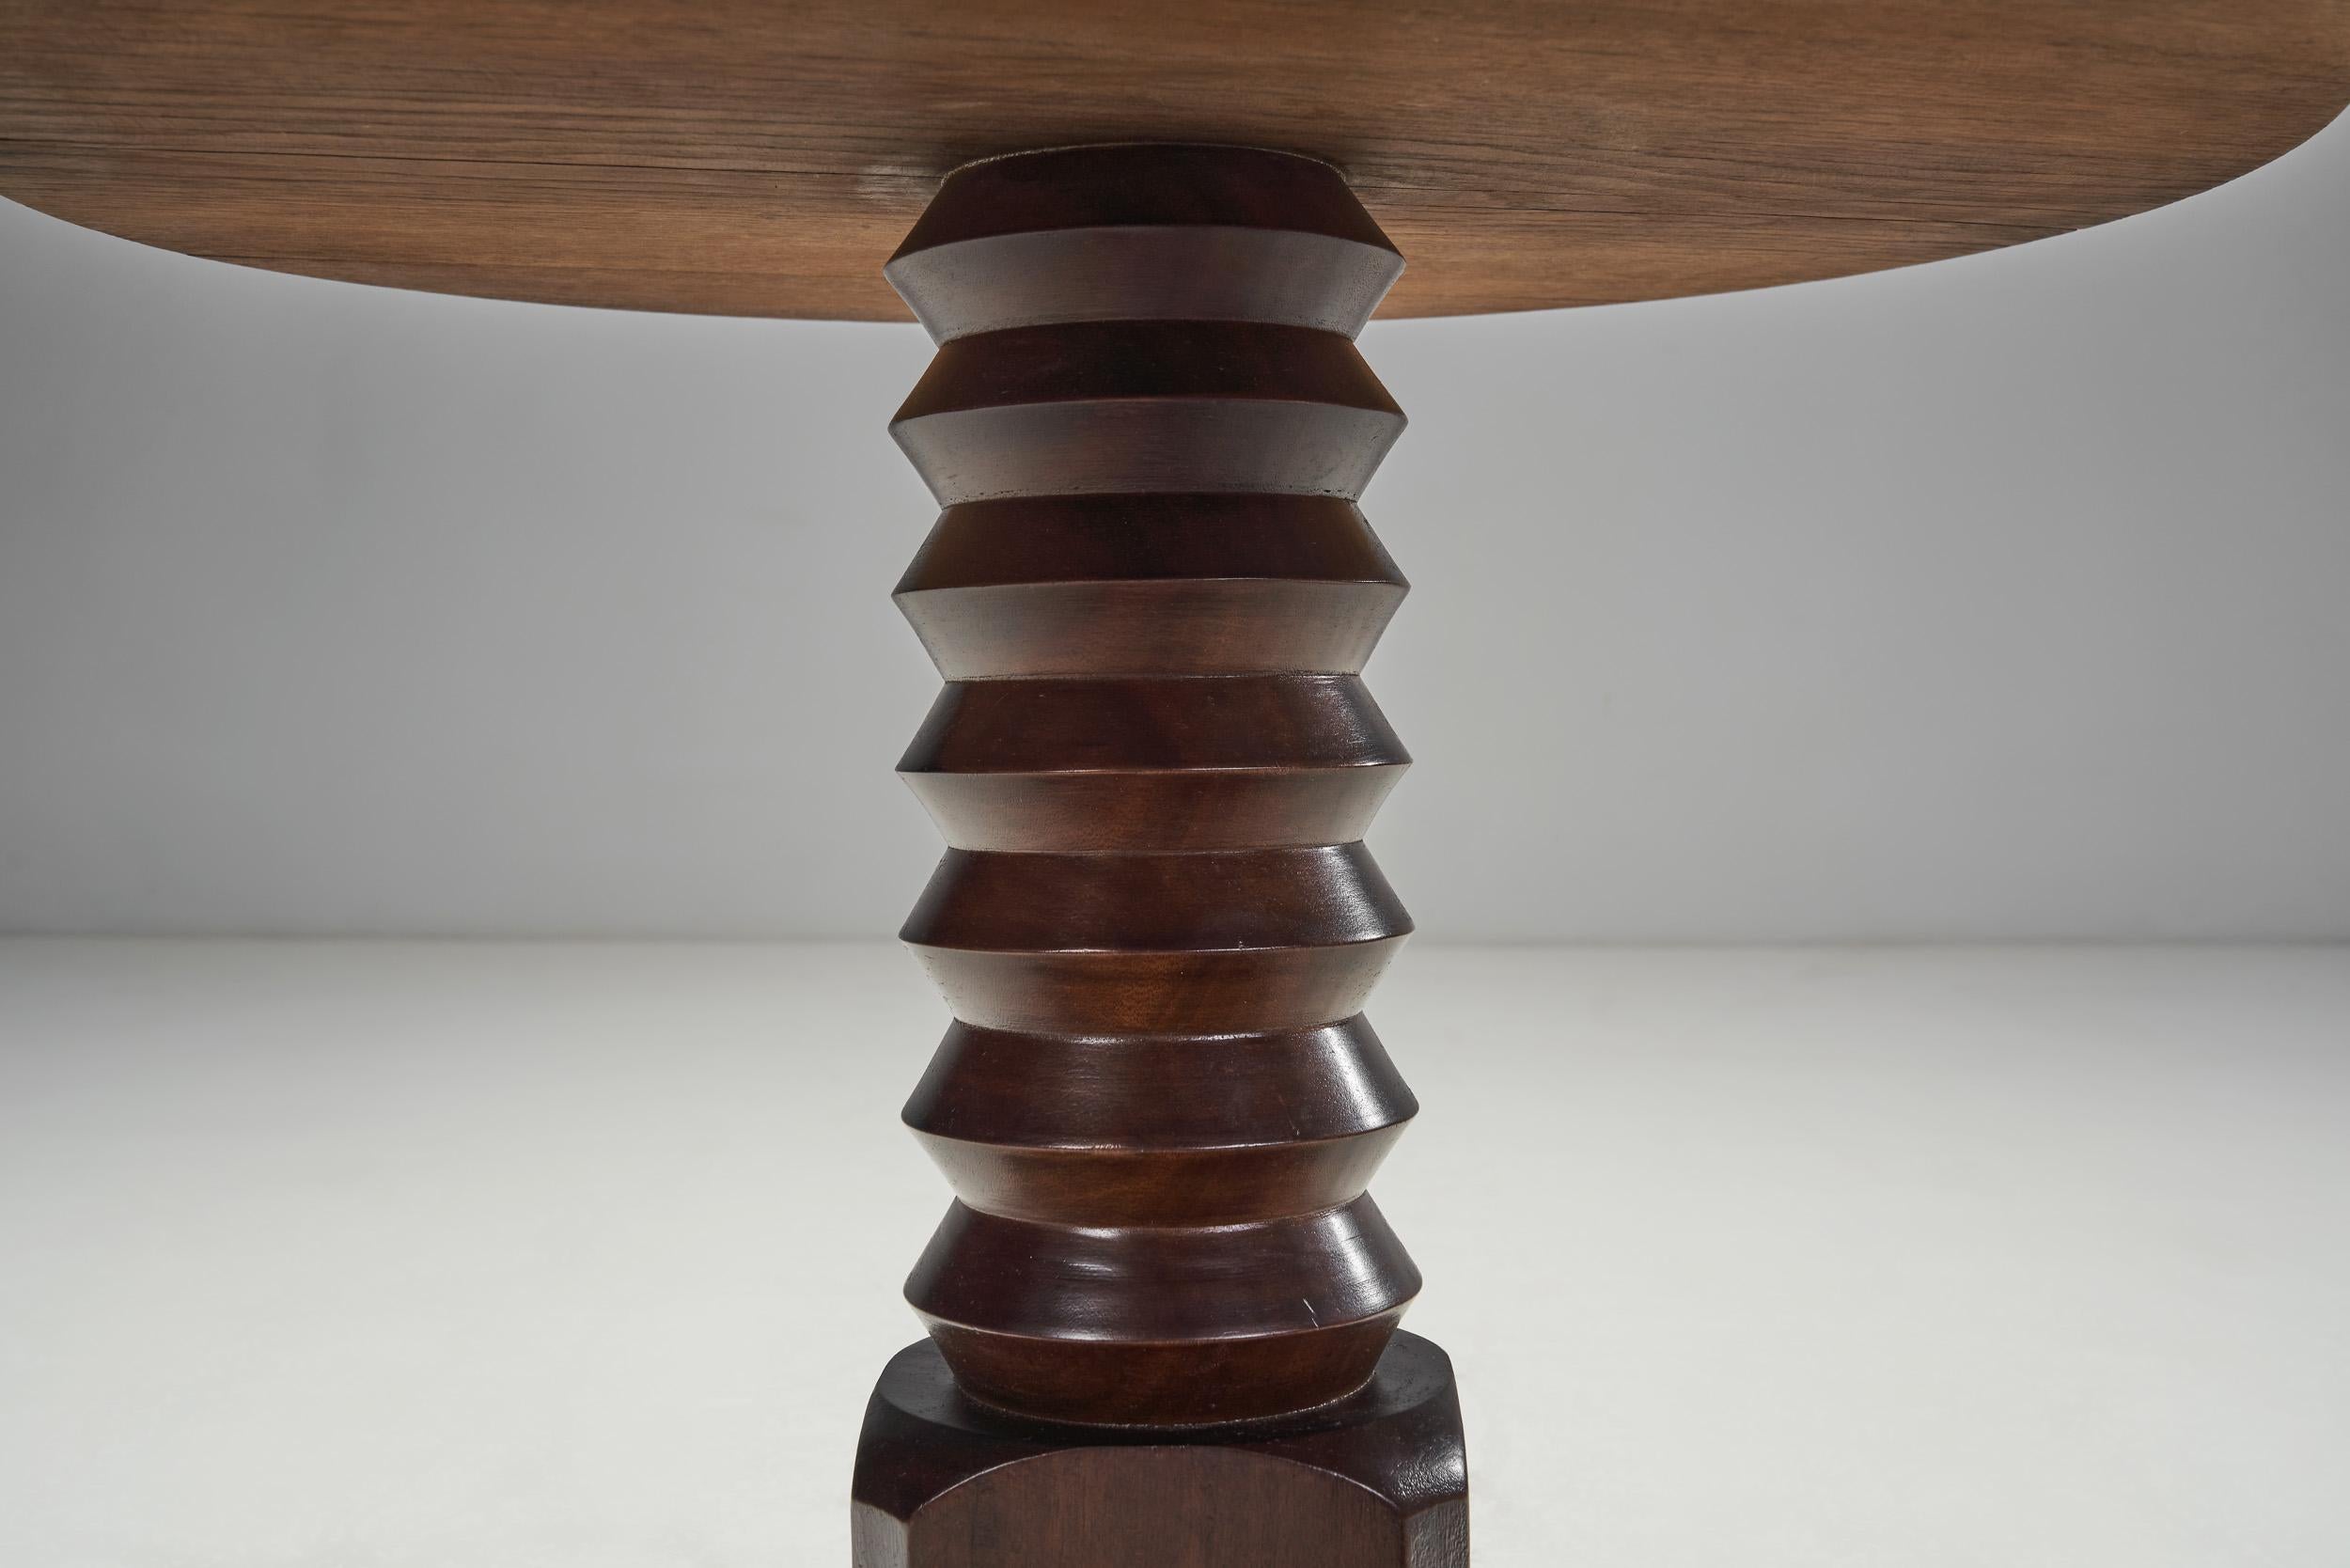 Sculptural Solid Wood Side Table with Column Base, Europe ca 1940s For Sale 5